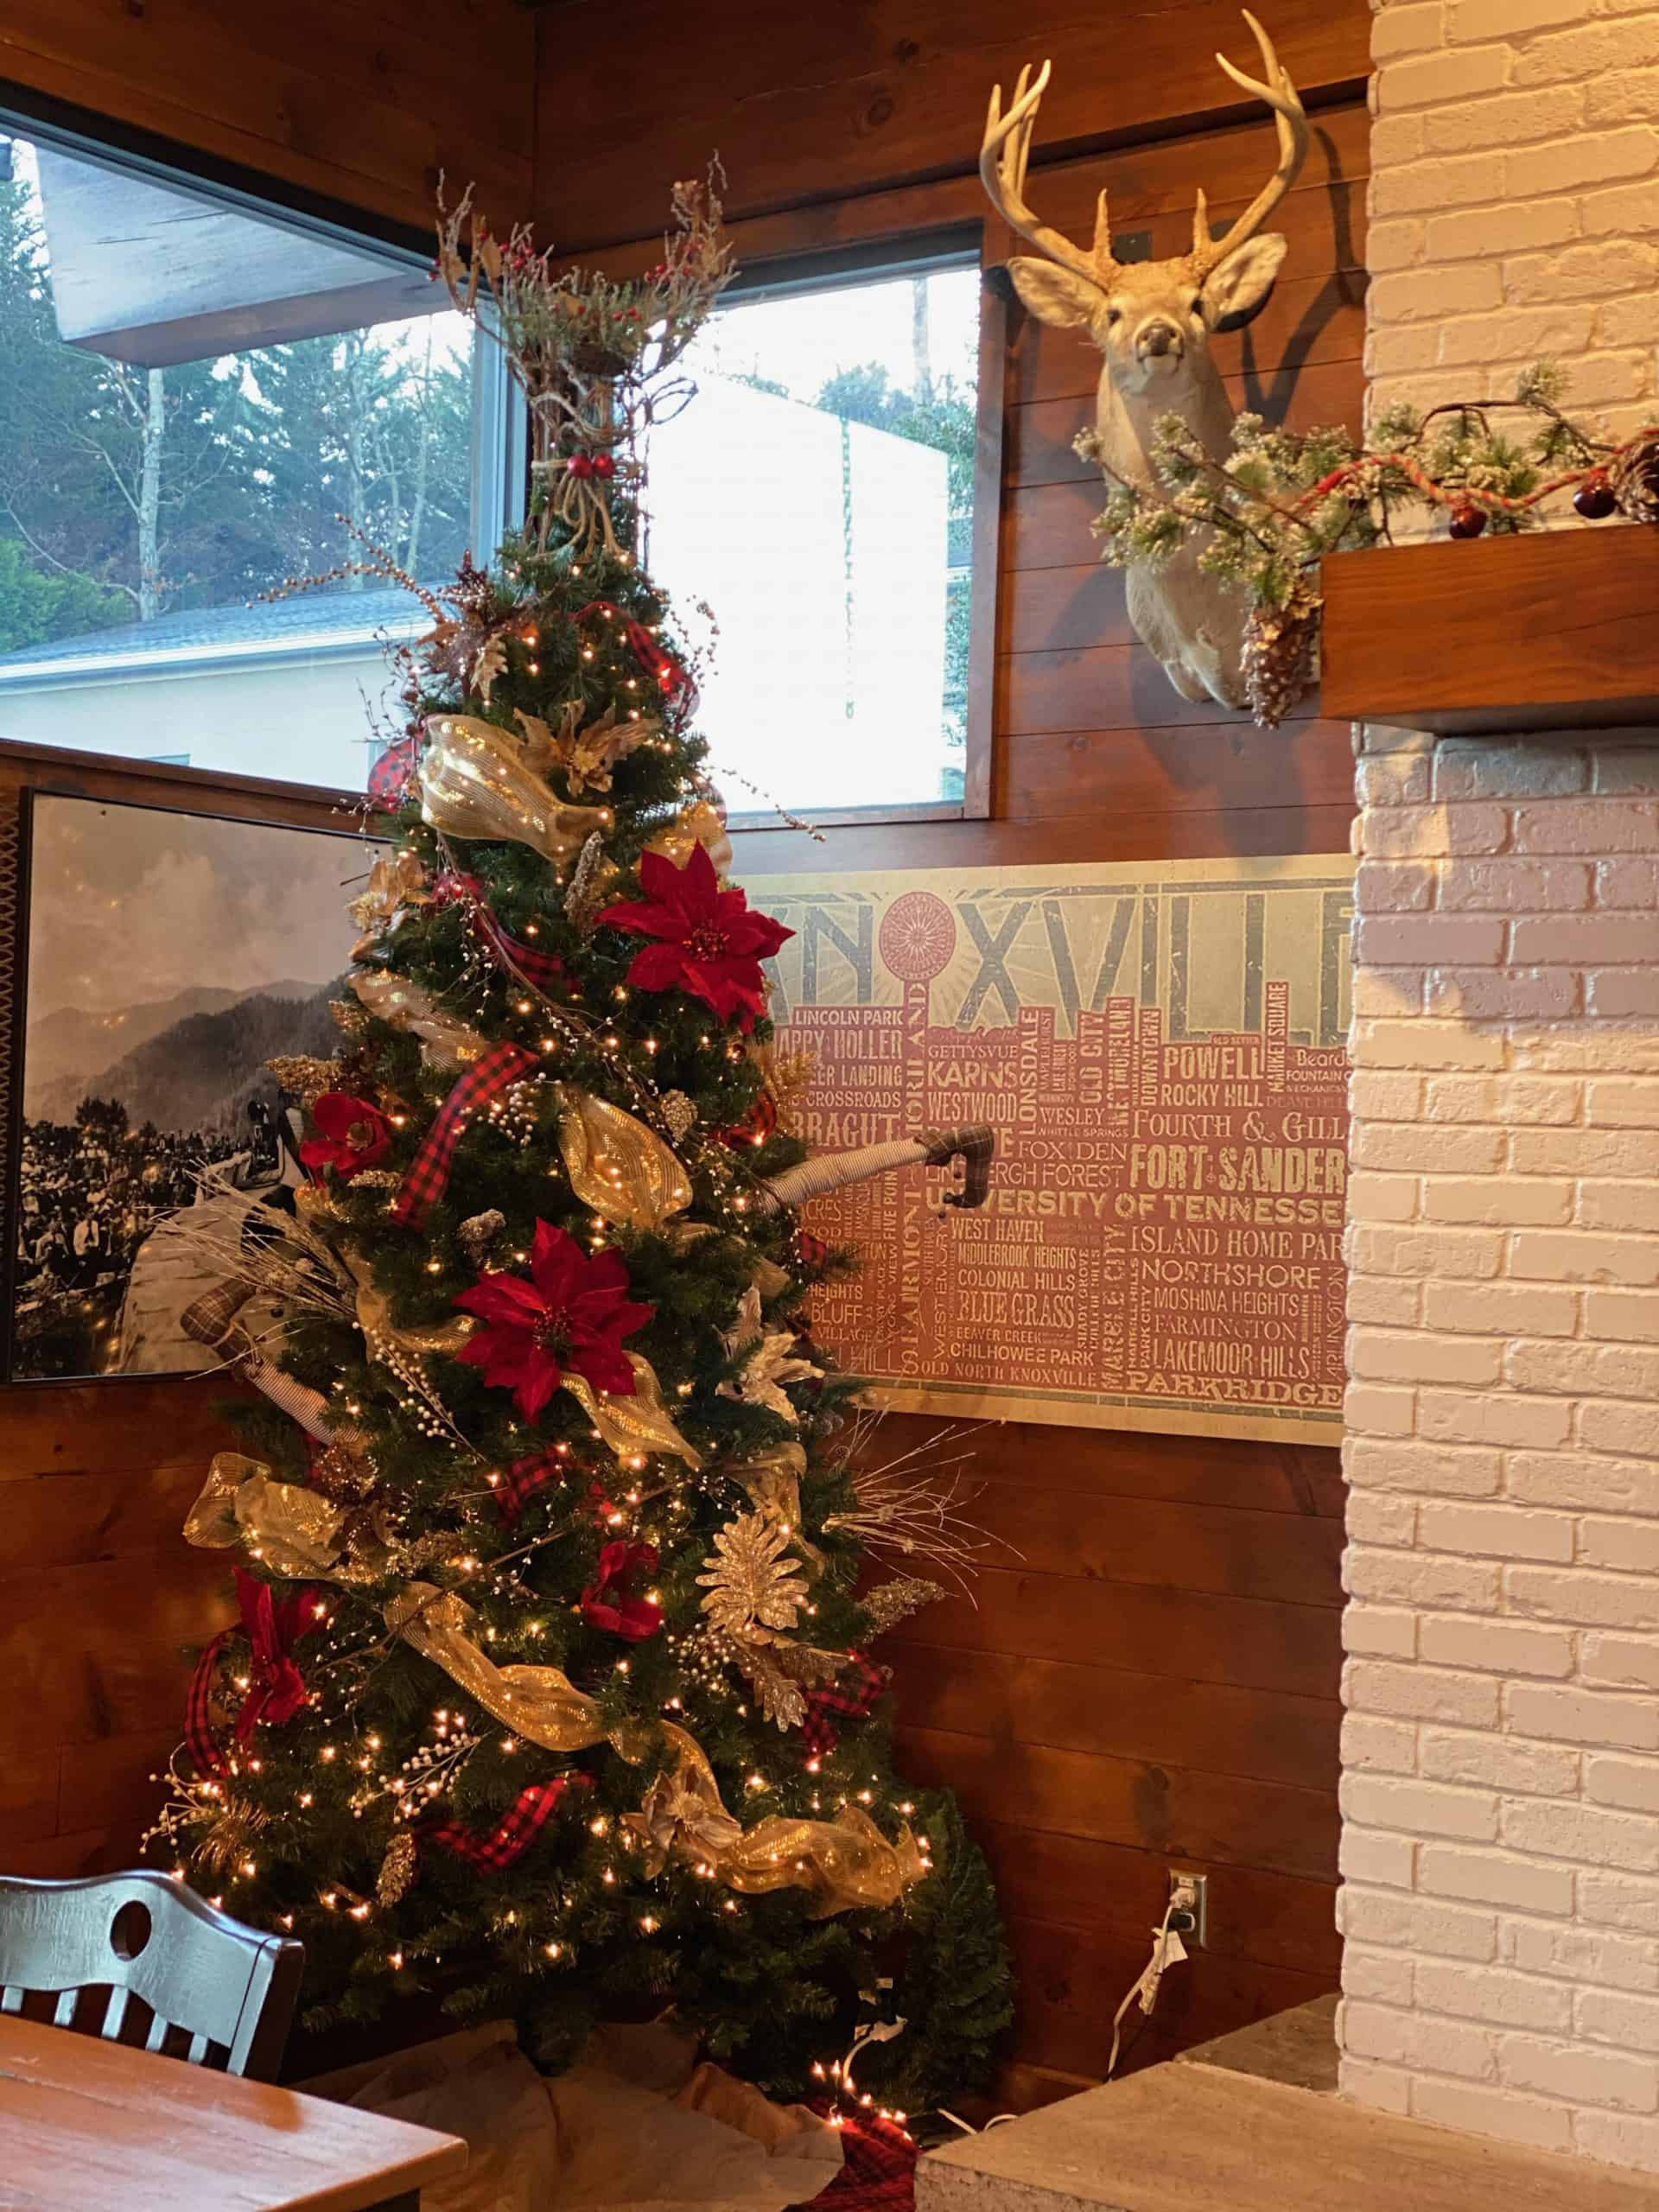 Celebrate the holiday season at Scrambled Jake's in Knoxville